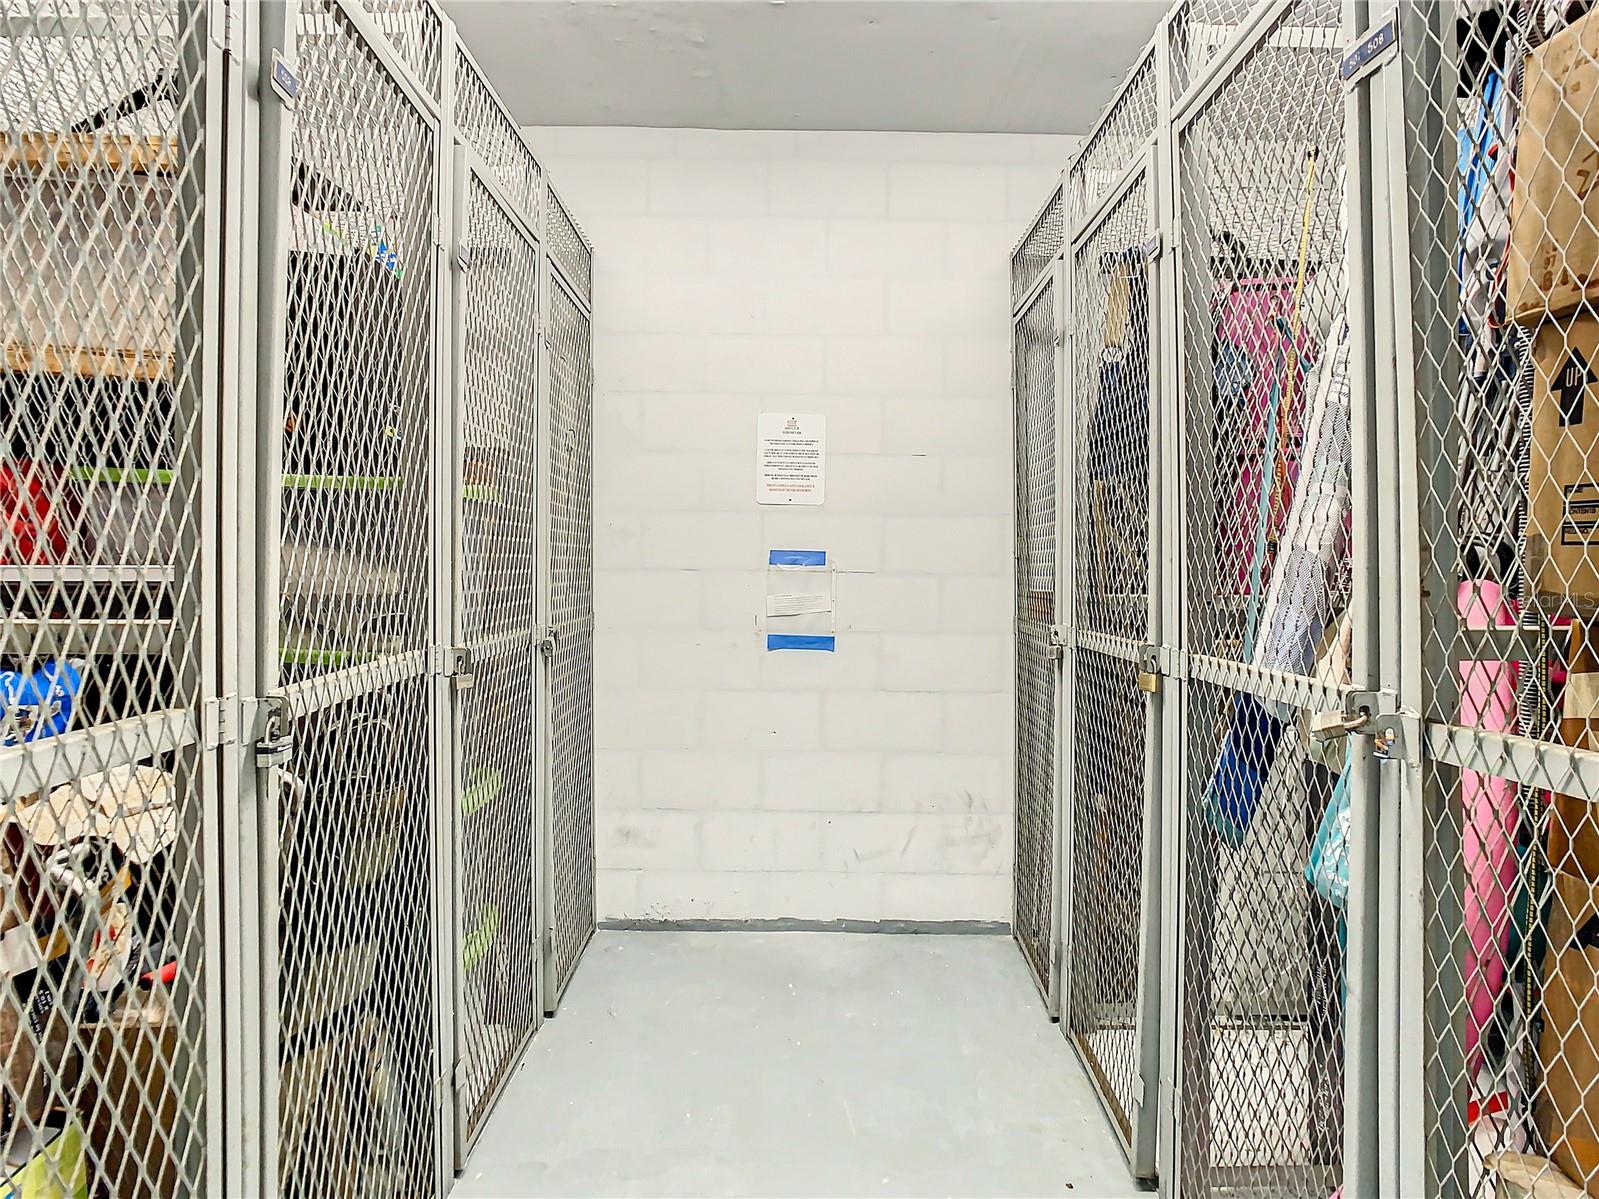 Another look at the storage room on the same floor as your unit.